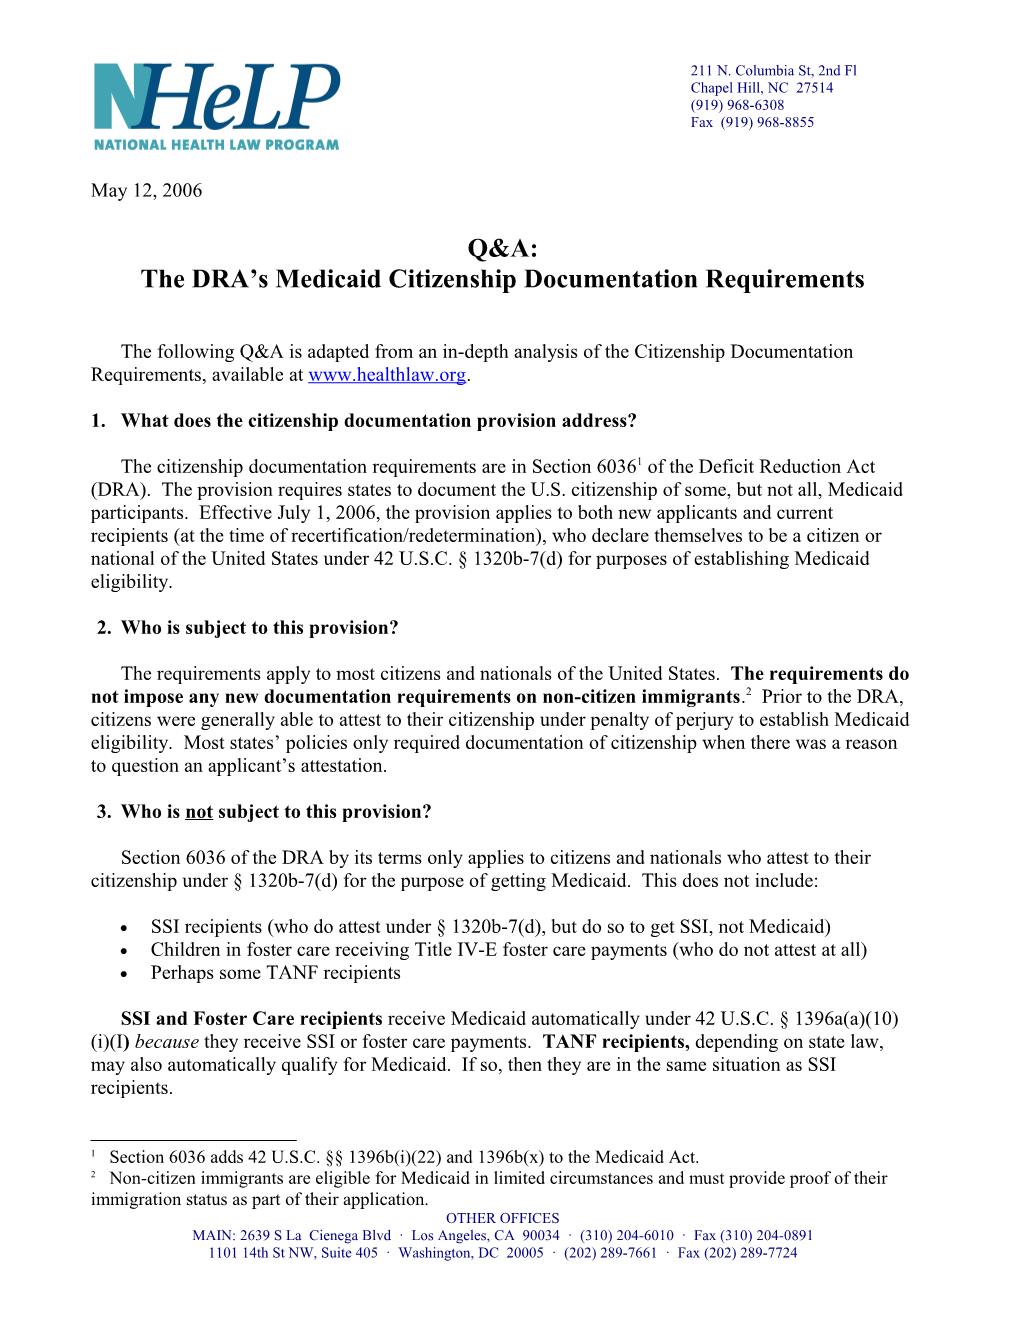 The Following Q&A Is Adapted from an In-Depth Analysis of the Citizenship Documentation